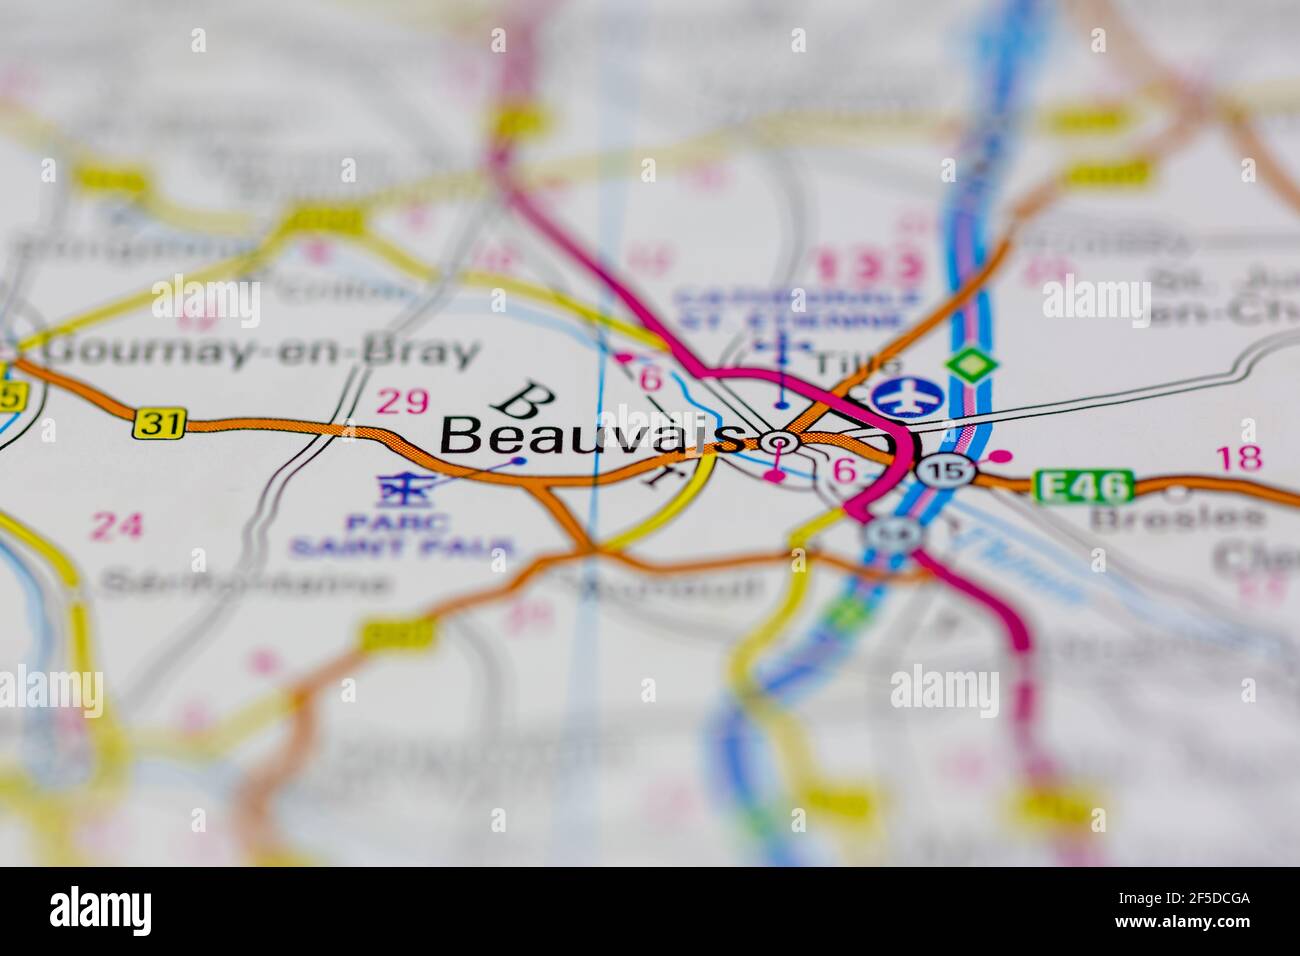 Beauvais and surrounding areas Shown on a Geography map or road map Stock Photo